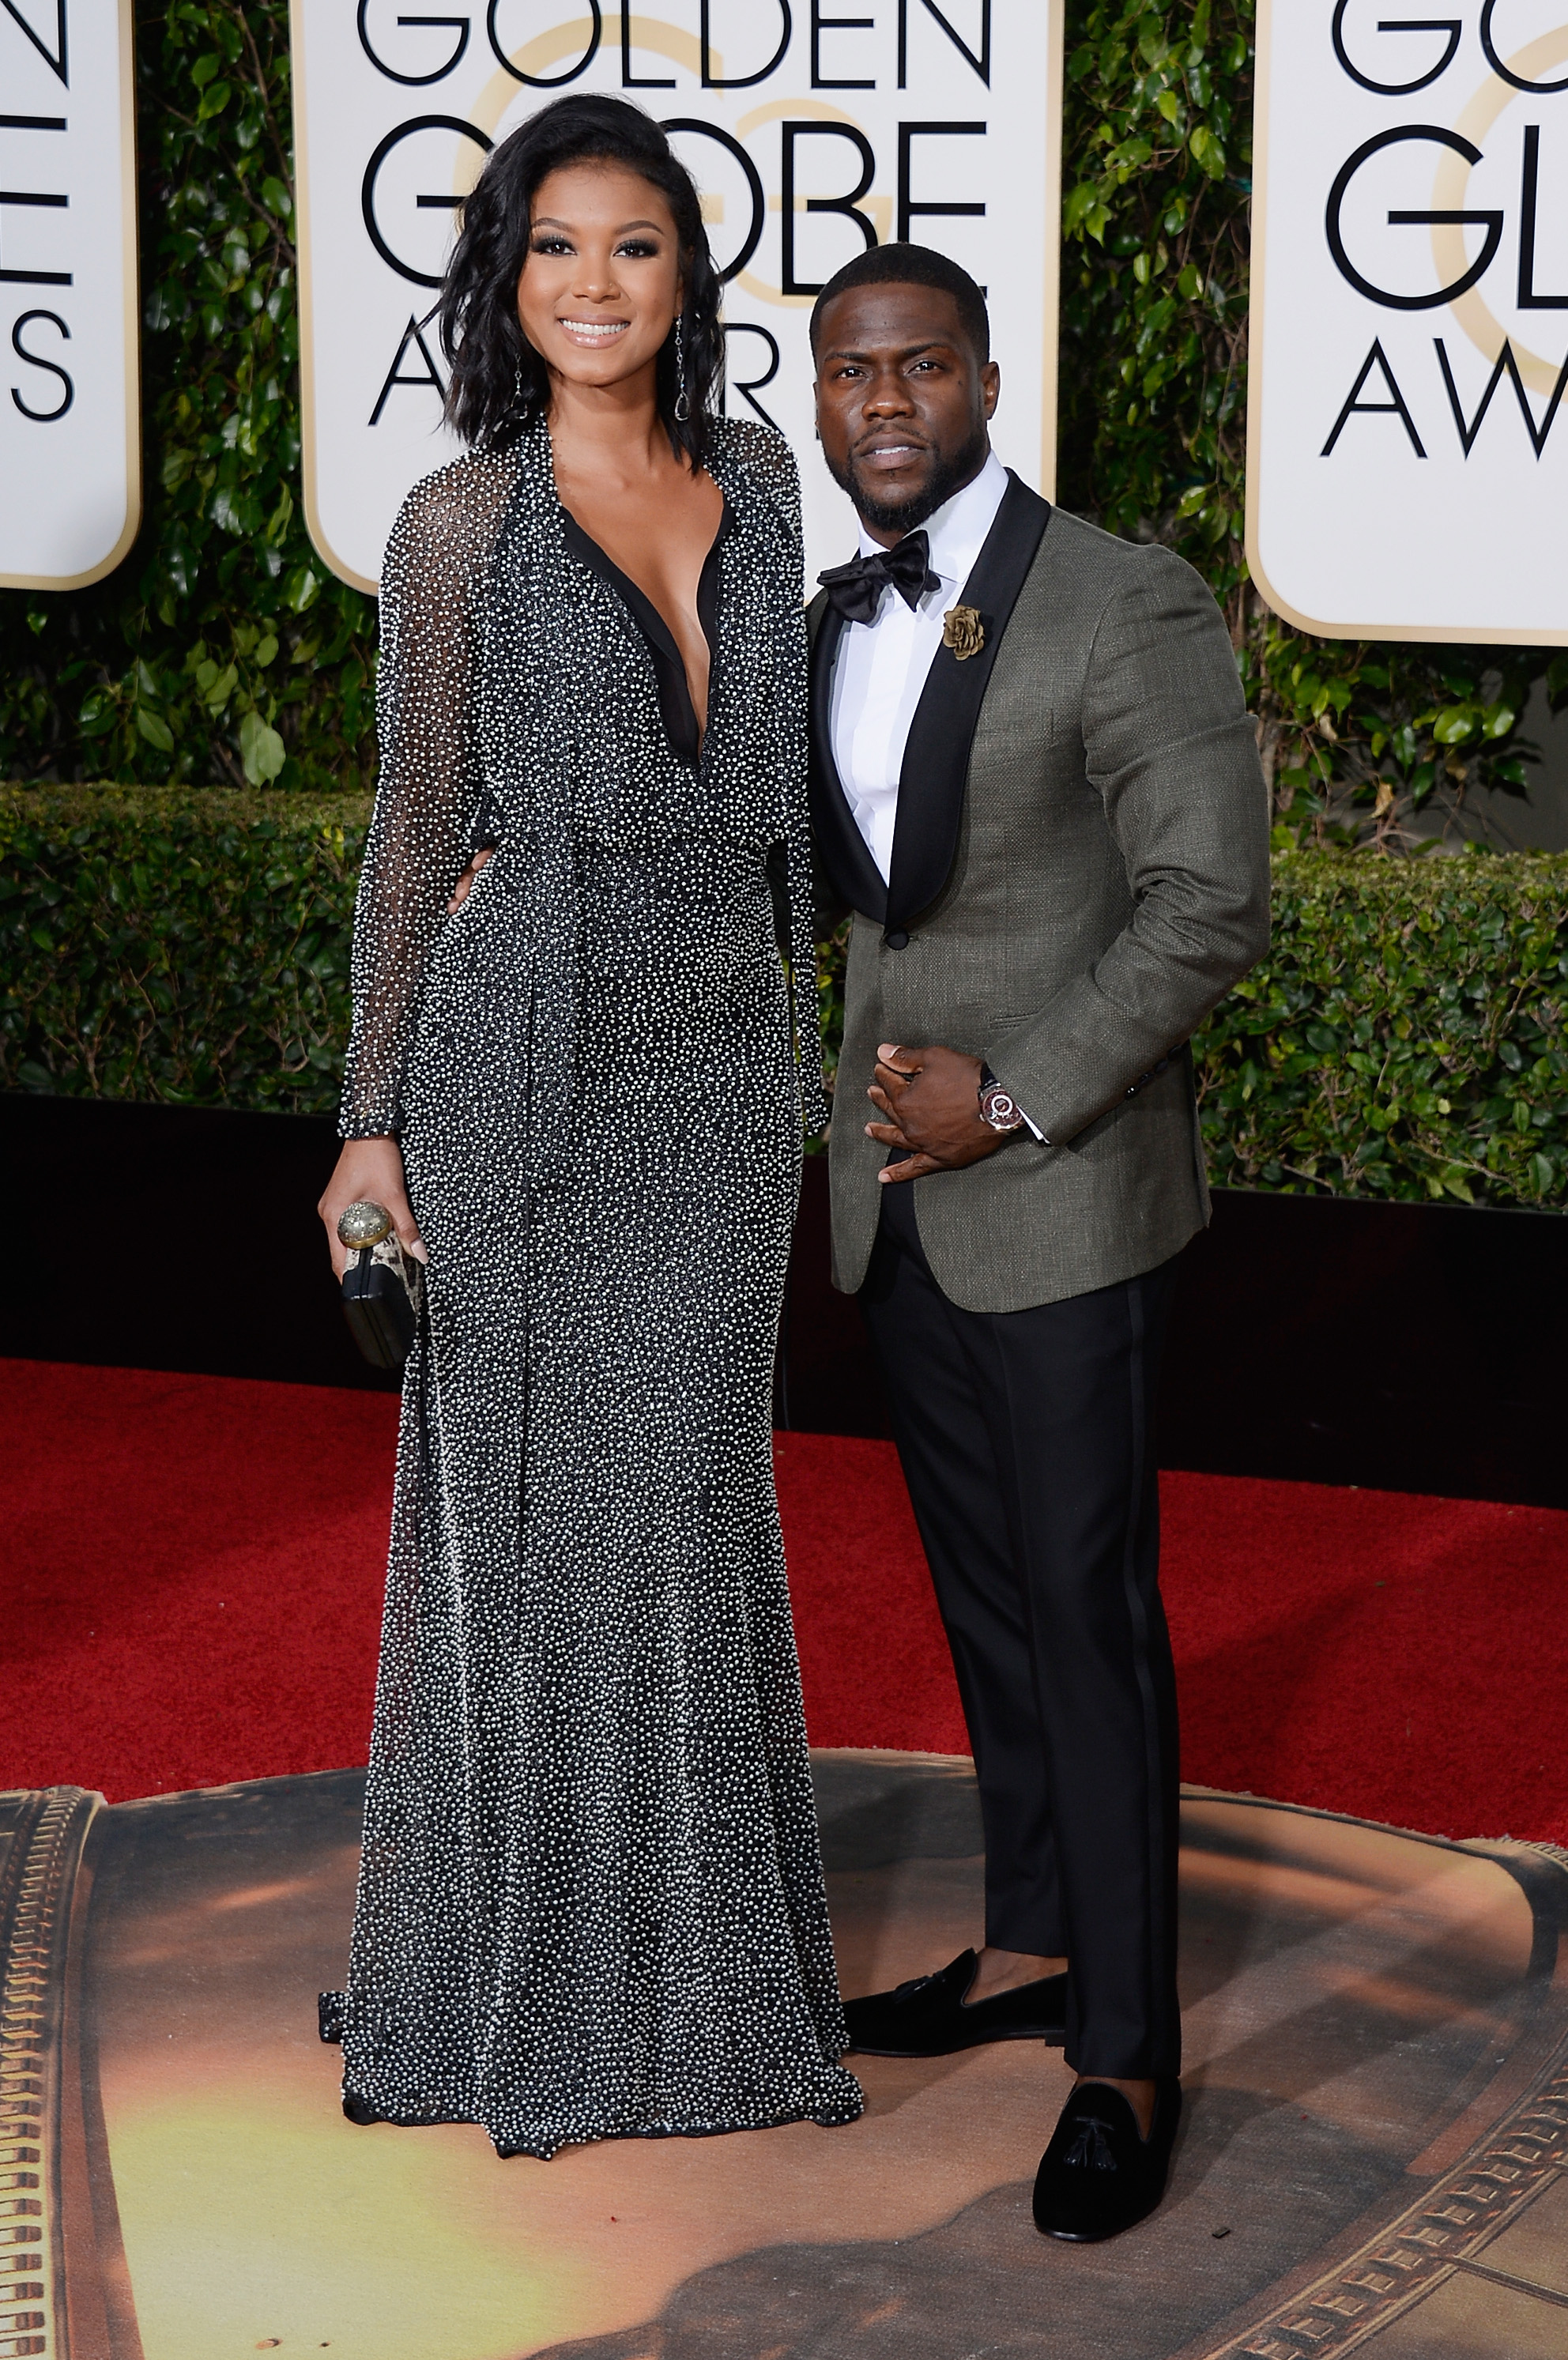 Eniko Parrish and Kevin Hart arrive to the 73rd Annual Golden Globe Awards on Jan. 10, 2016 in Beverly Hills.